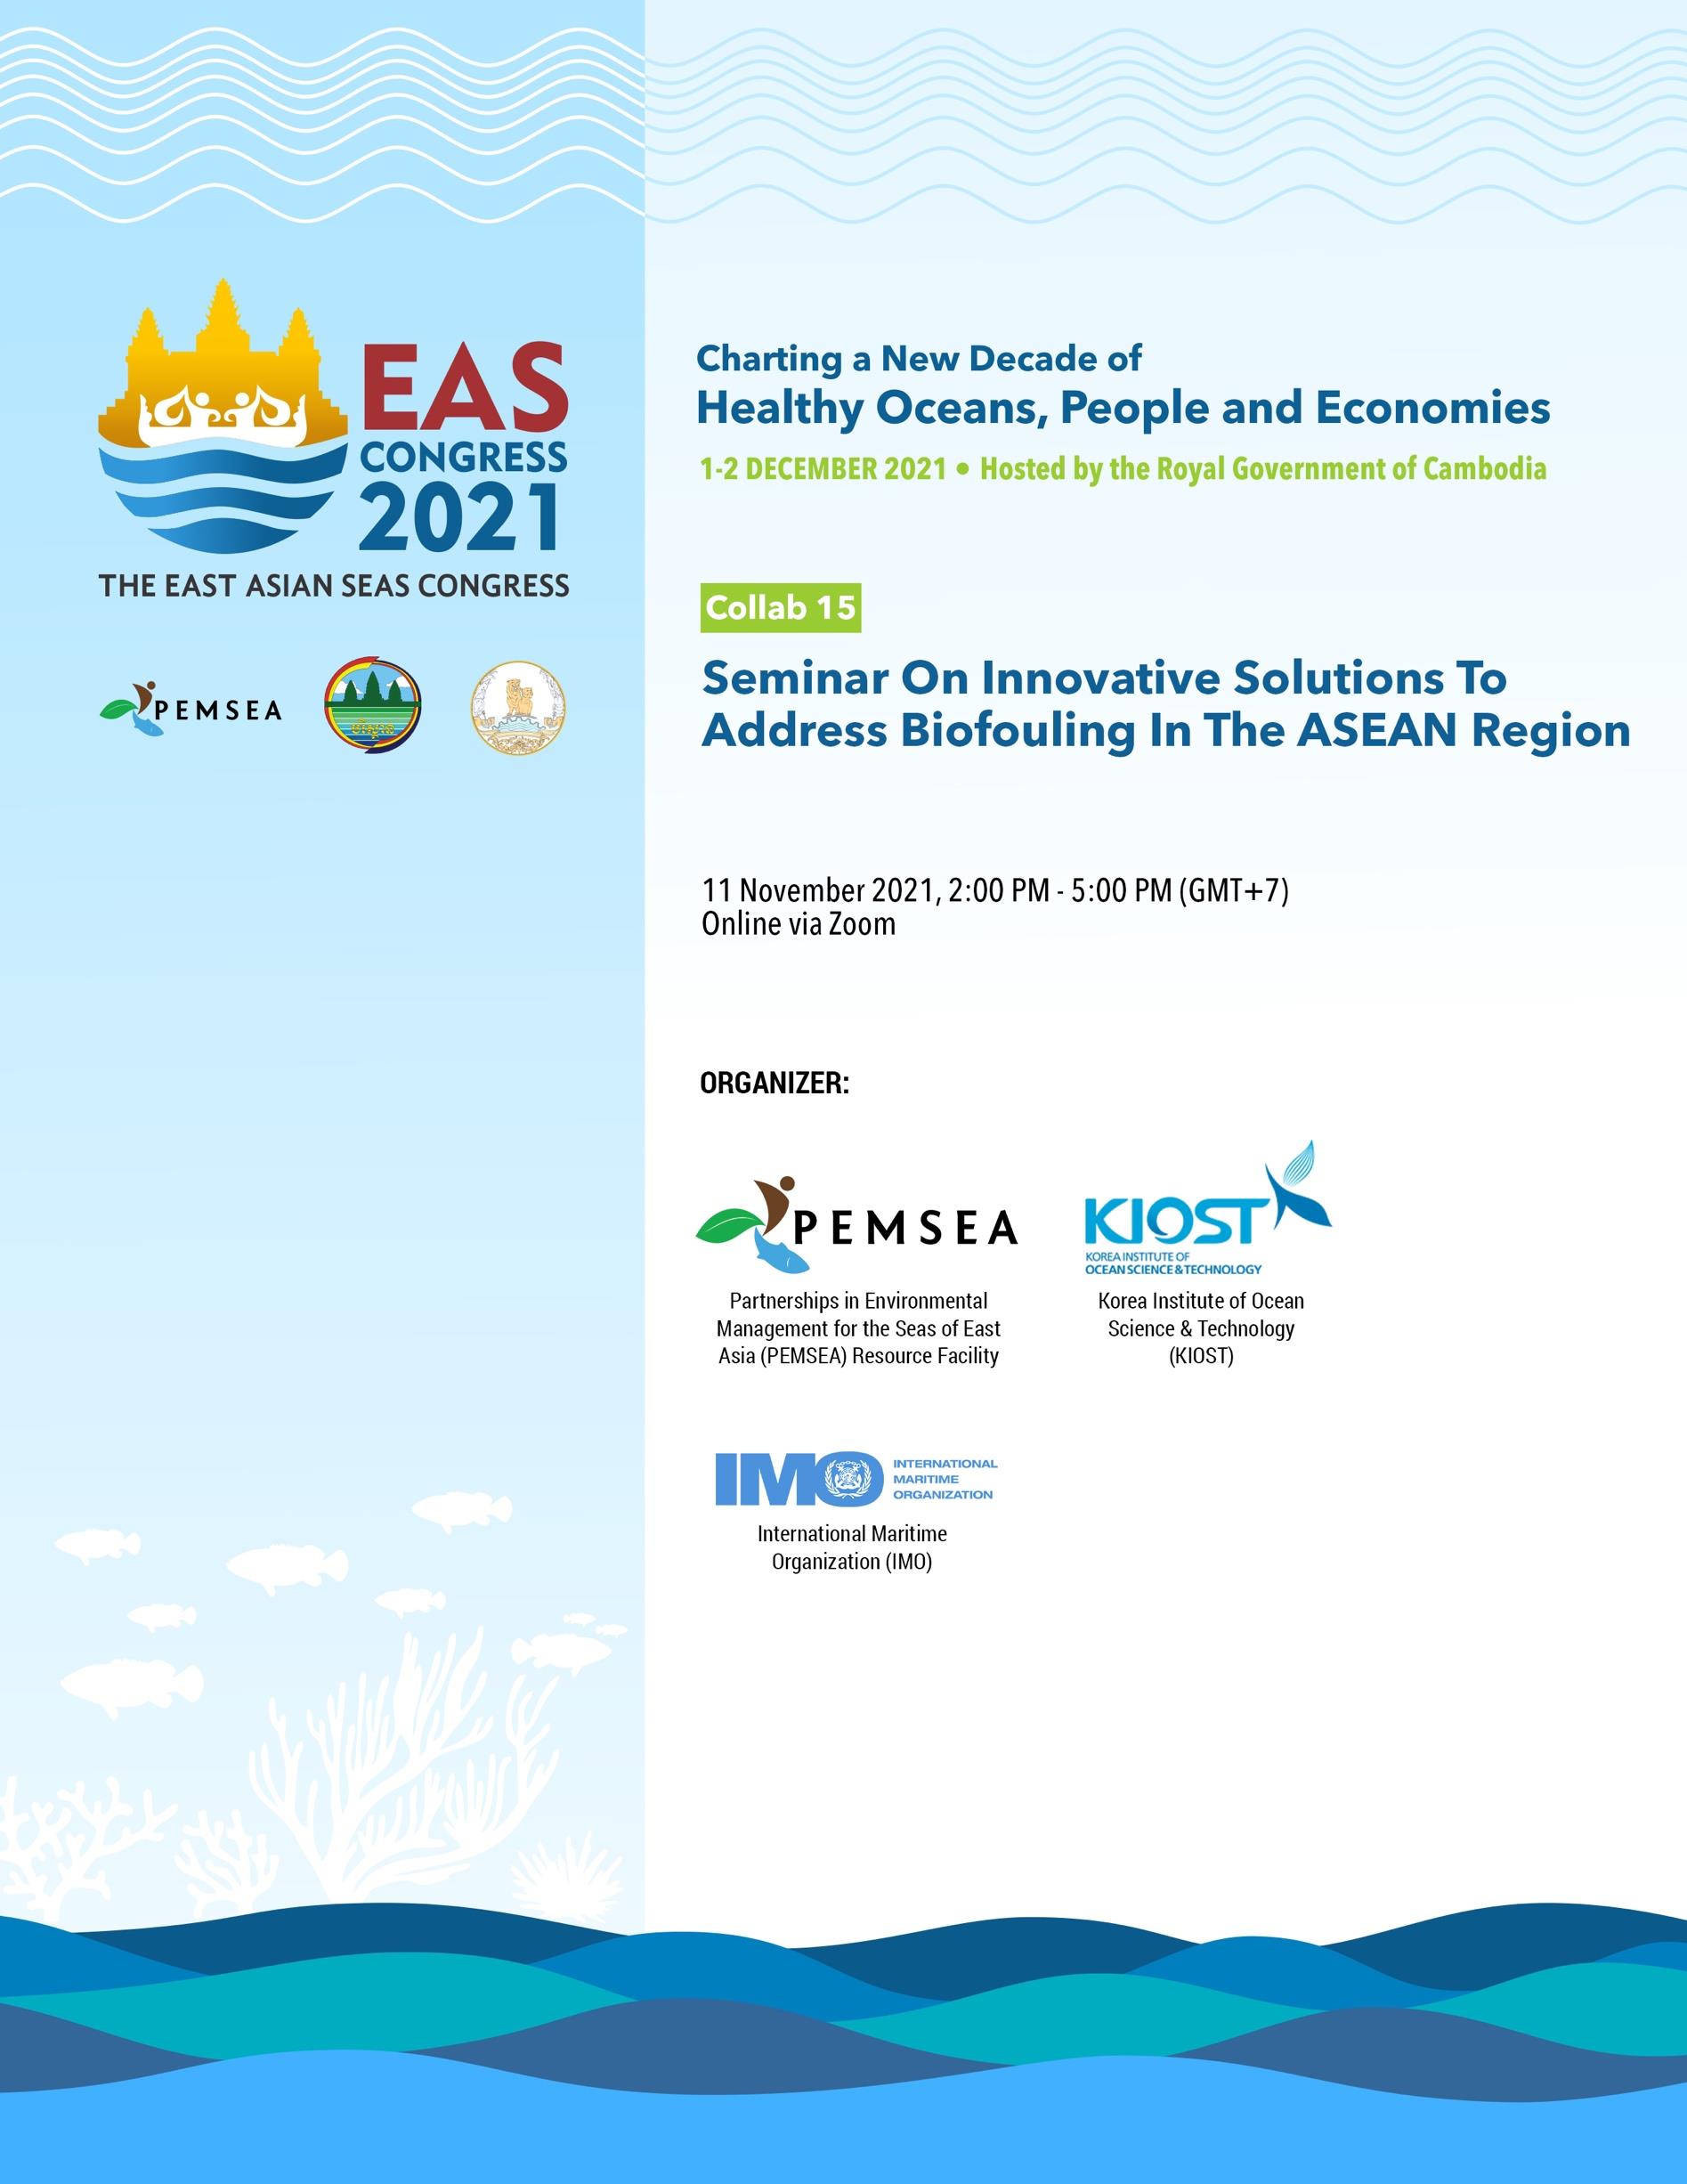 Collab 15 Seminar on Innovative Solutions to Address Biofouling in the ASEAN Region